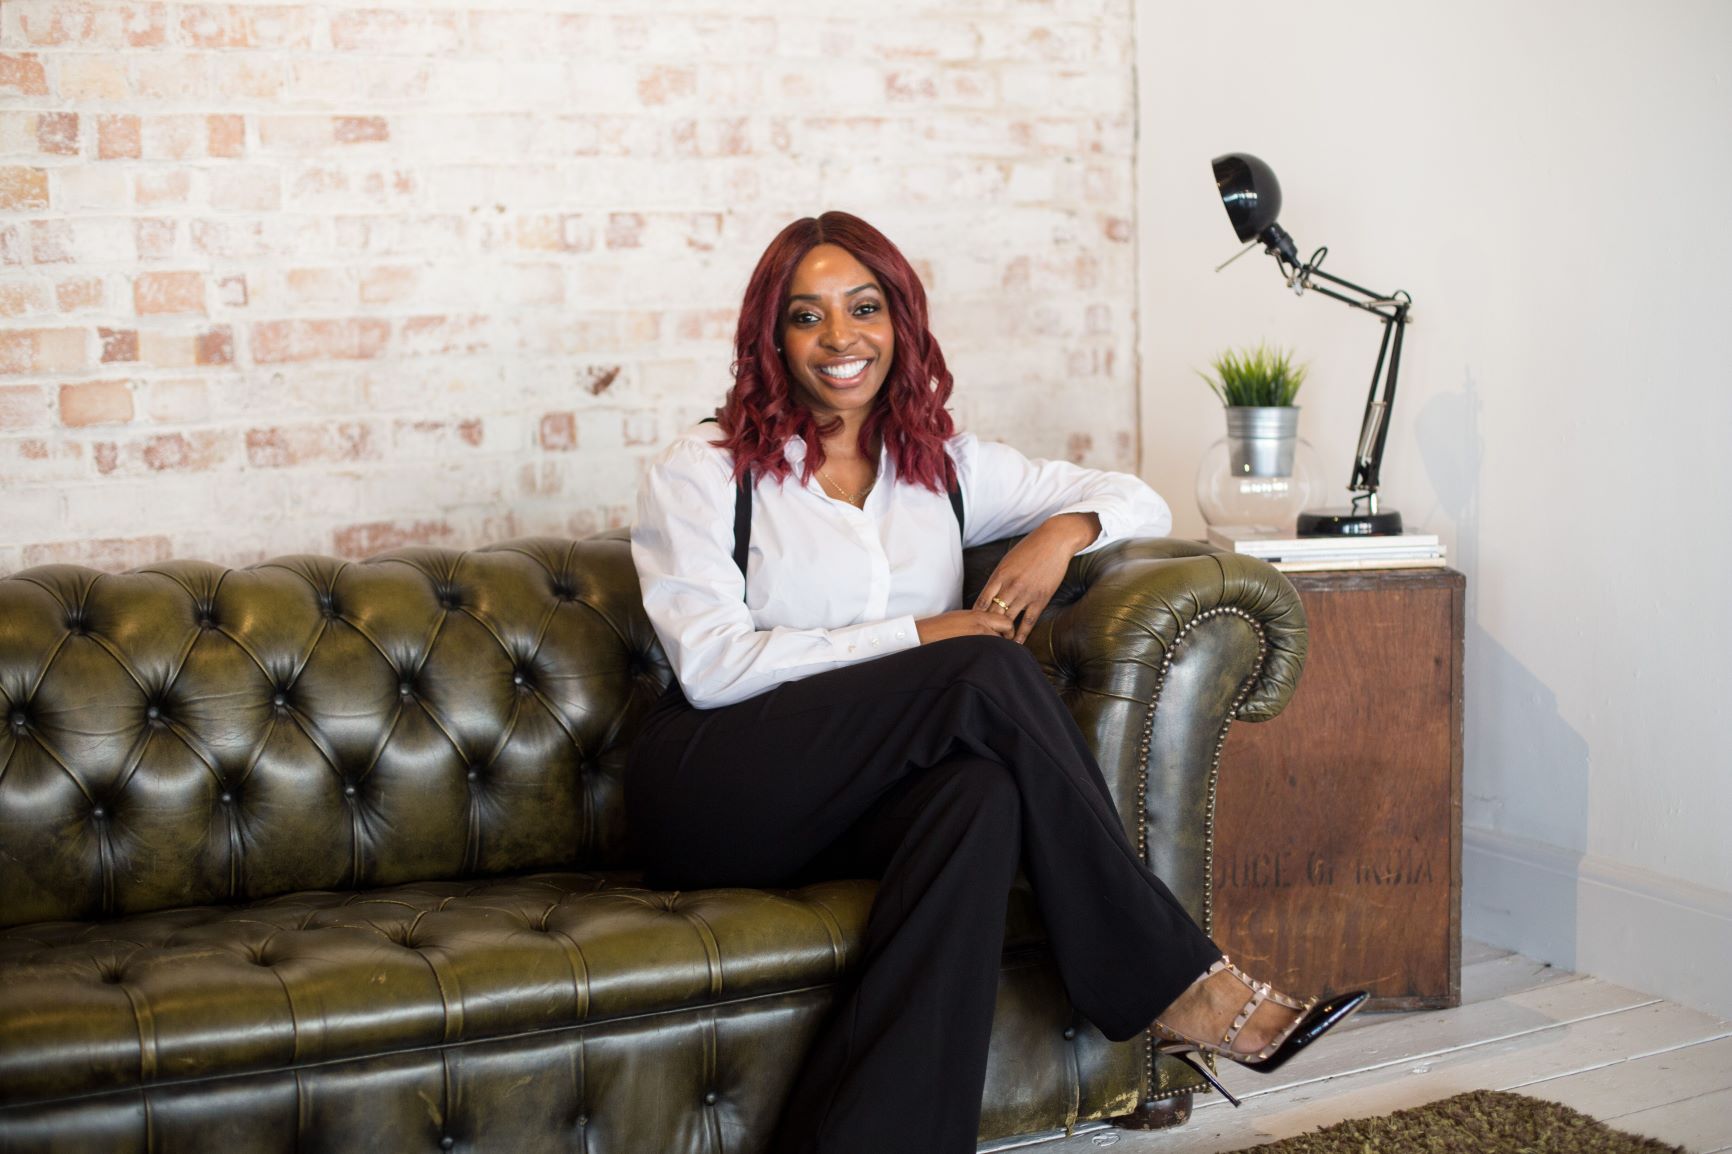 Q&A with Bianca Estelle, Founder of Vitamin Injections London